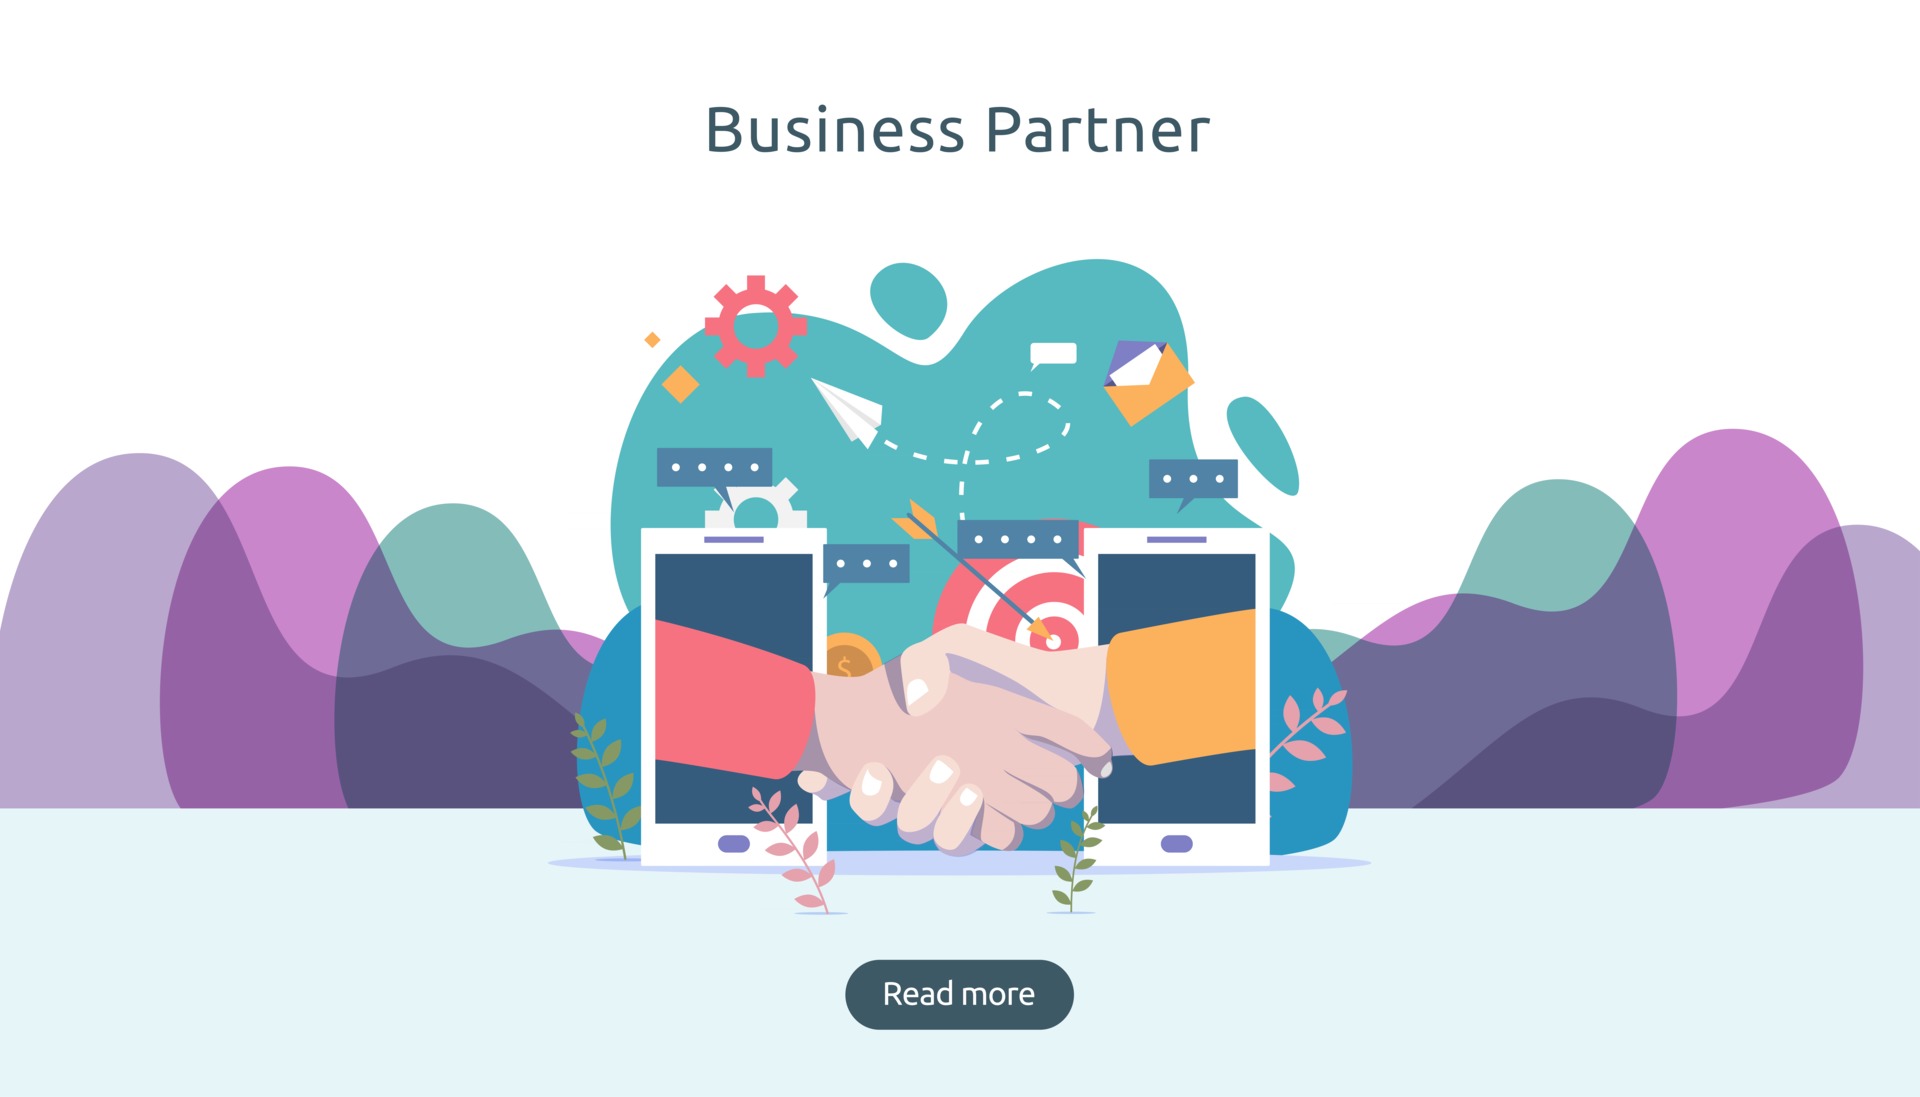 Business partnership relation concept with hand shake and tiny people ...